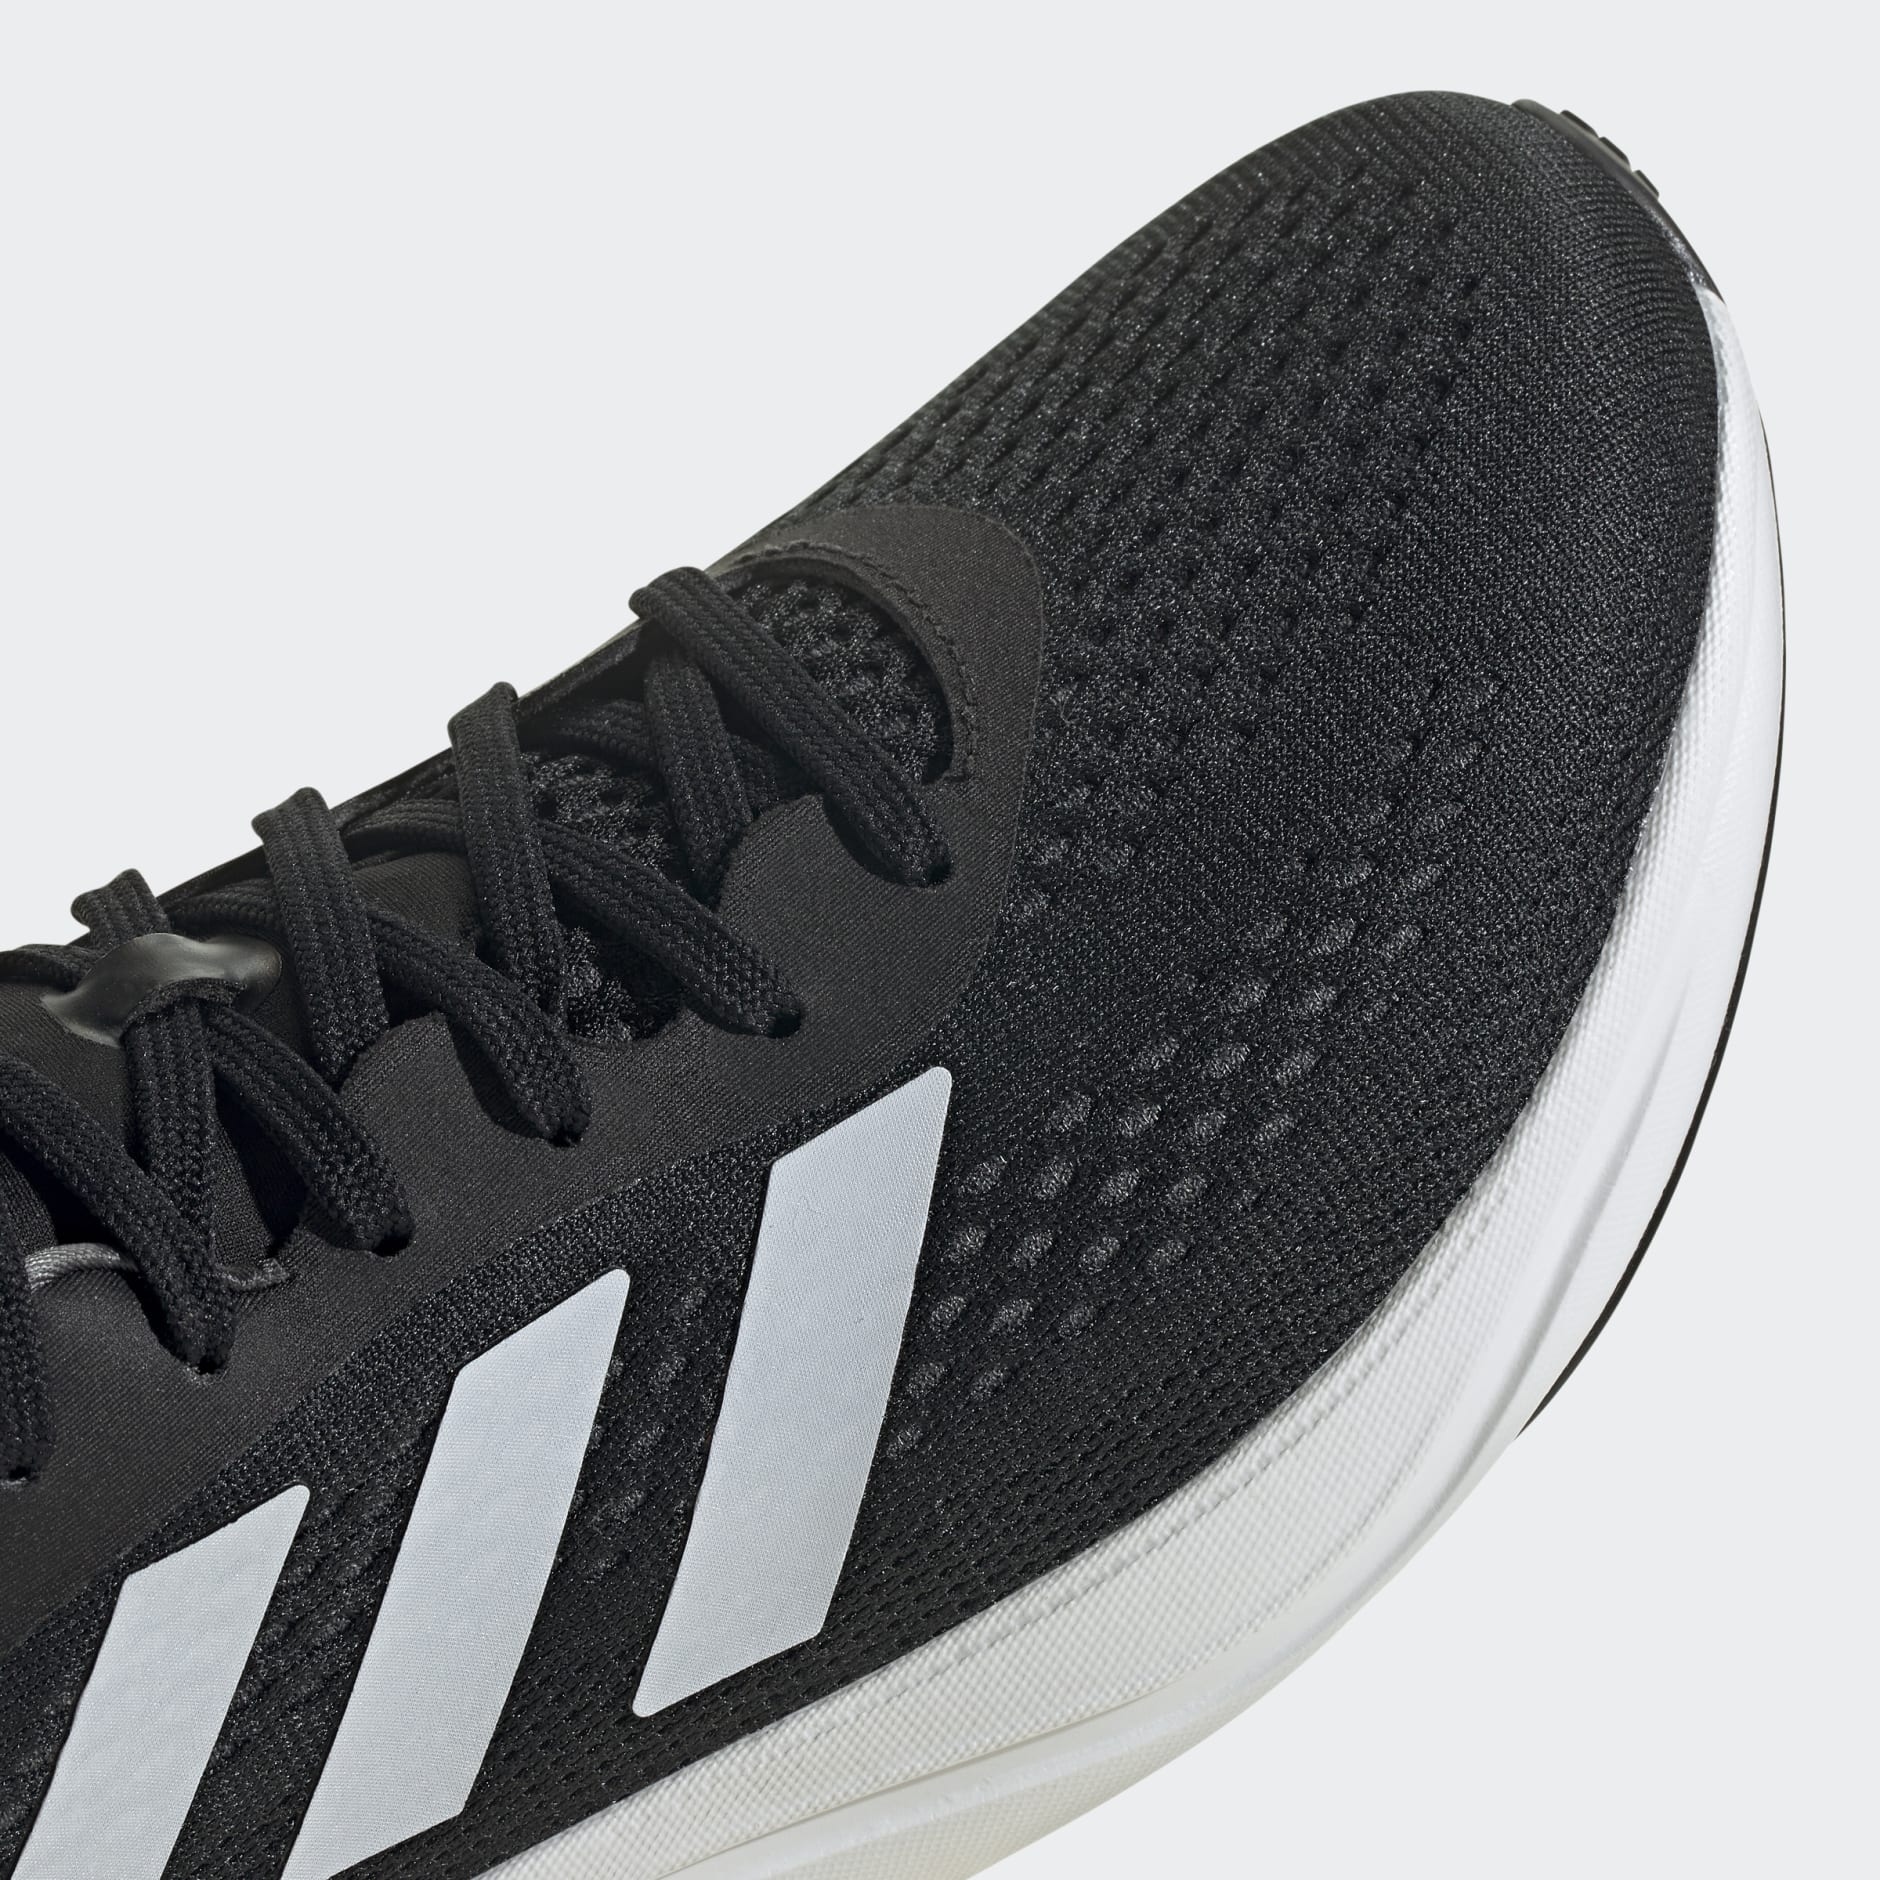 Shoes - Supernova 2 Running Shoes - Black | adidas South Africa